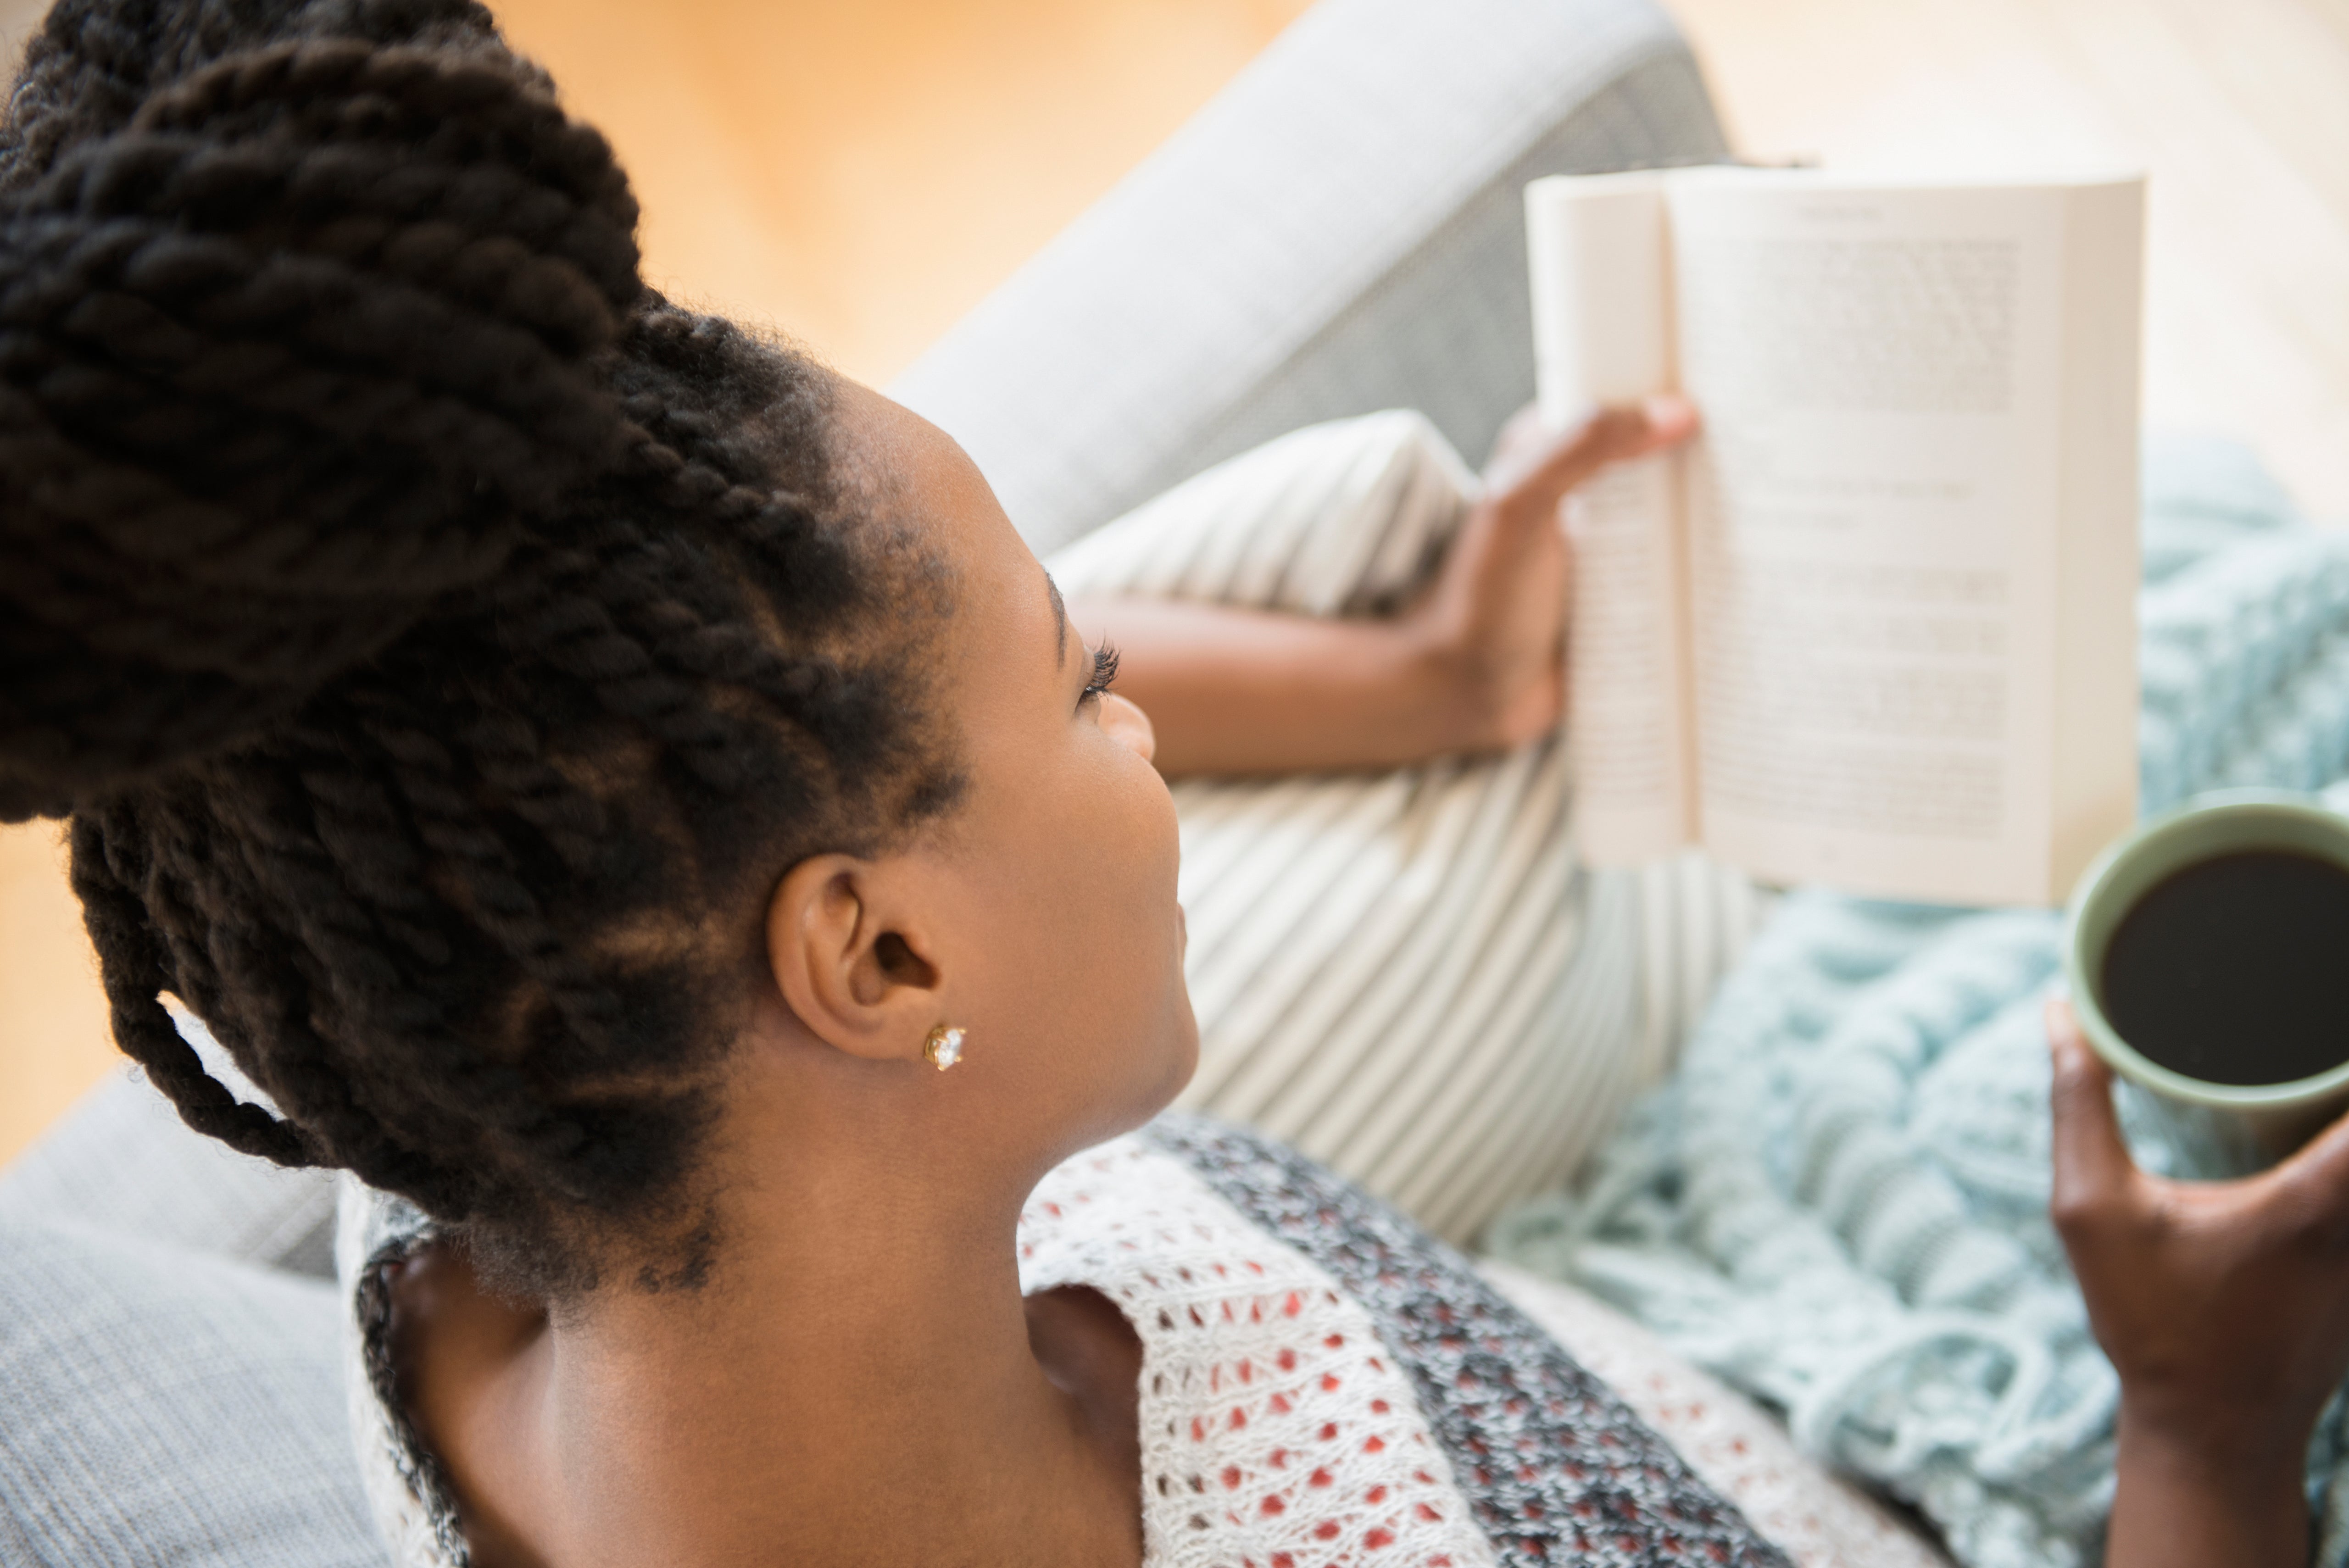 4 Ways Reading Makes You a Better Person
